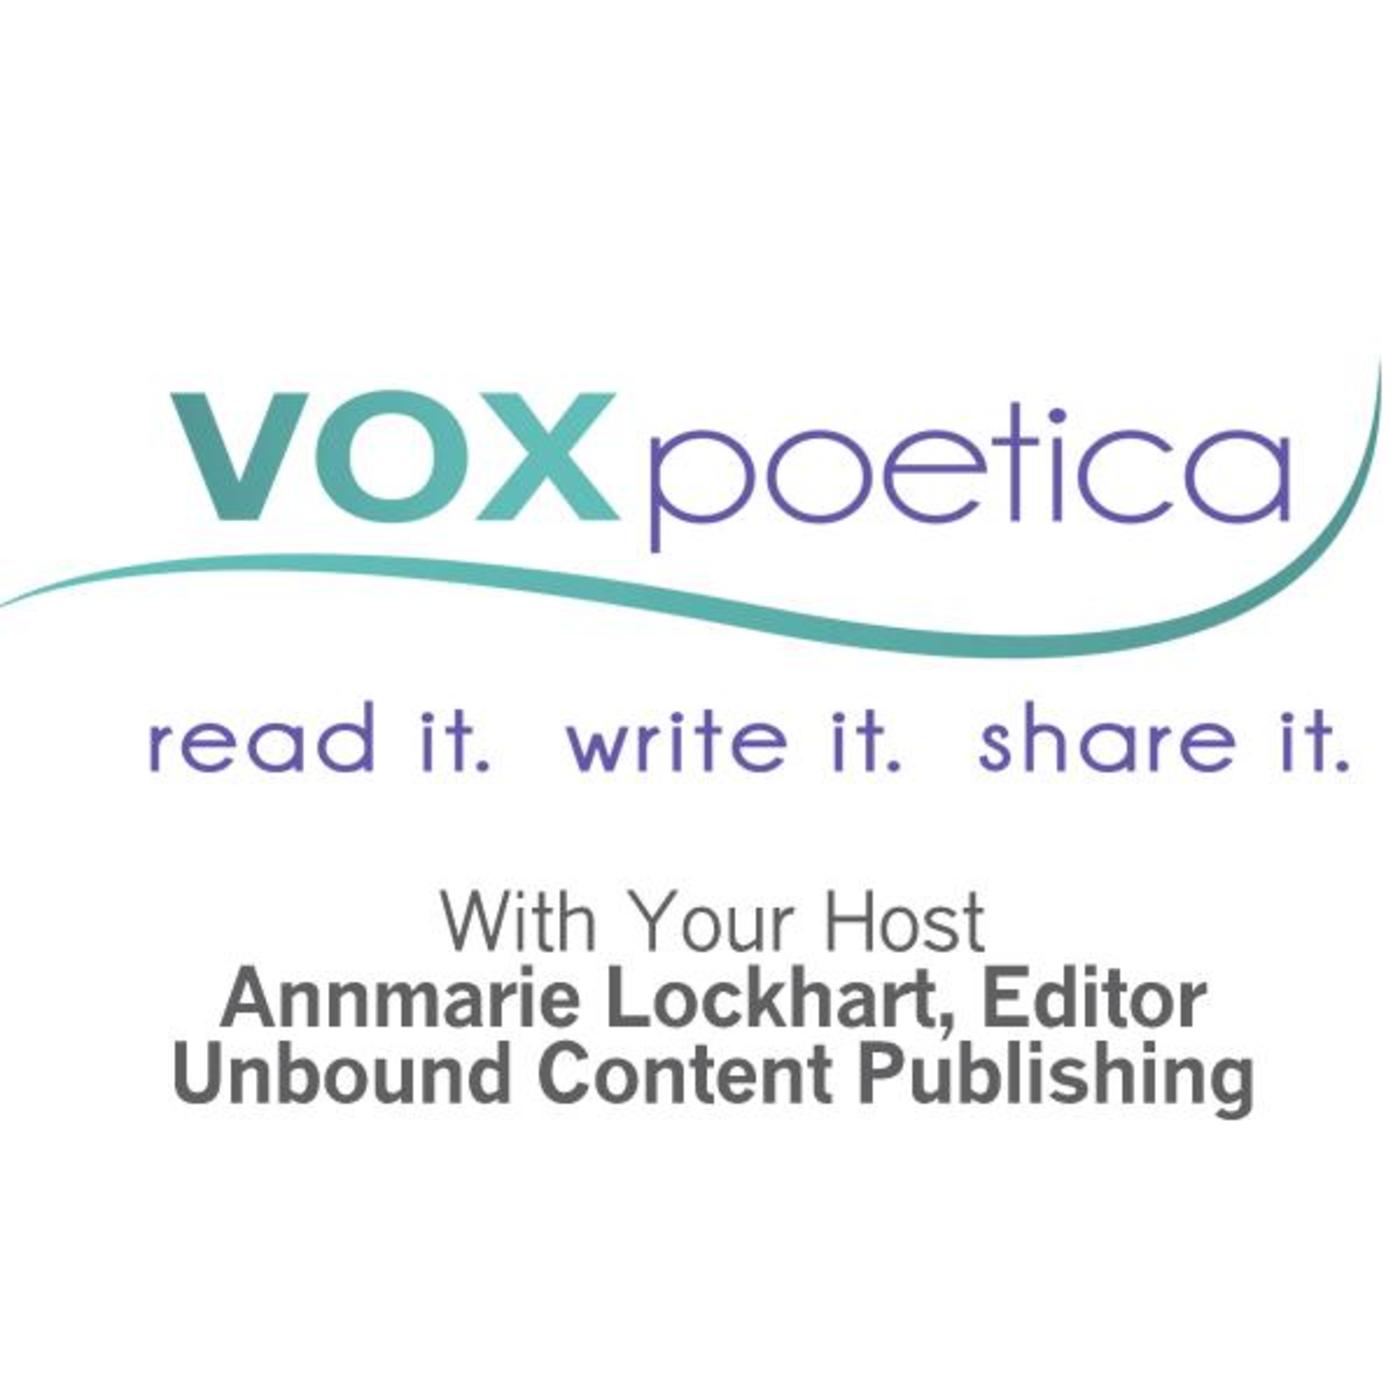 vox poetica's 15 Minutes of Poetry